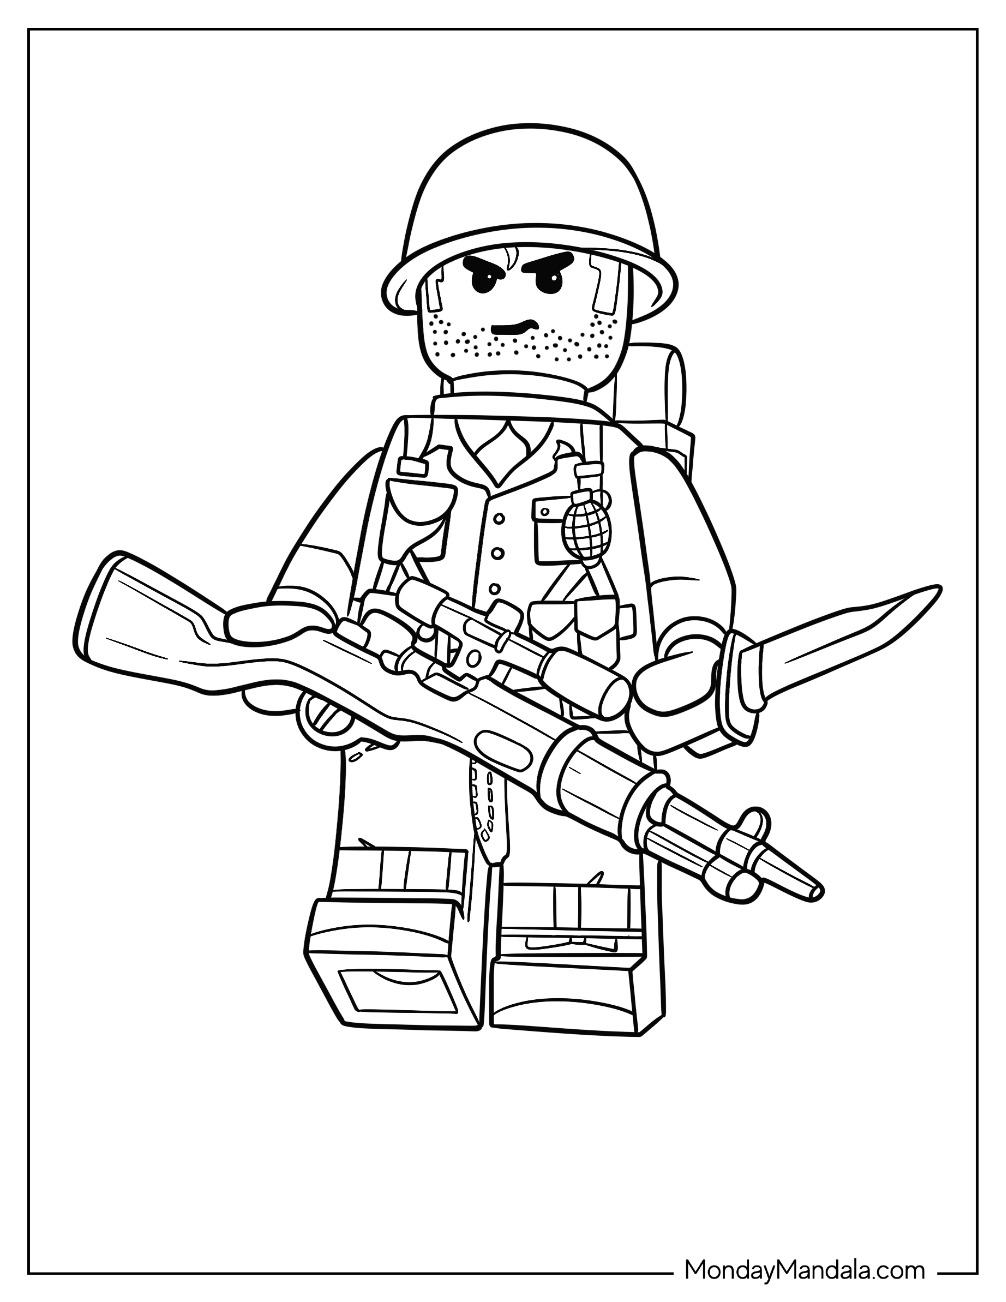 Soldier coloring pages free pdf printables